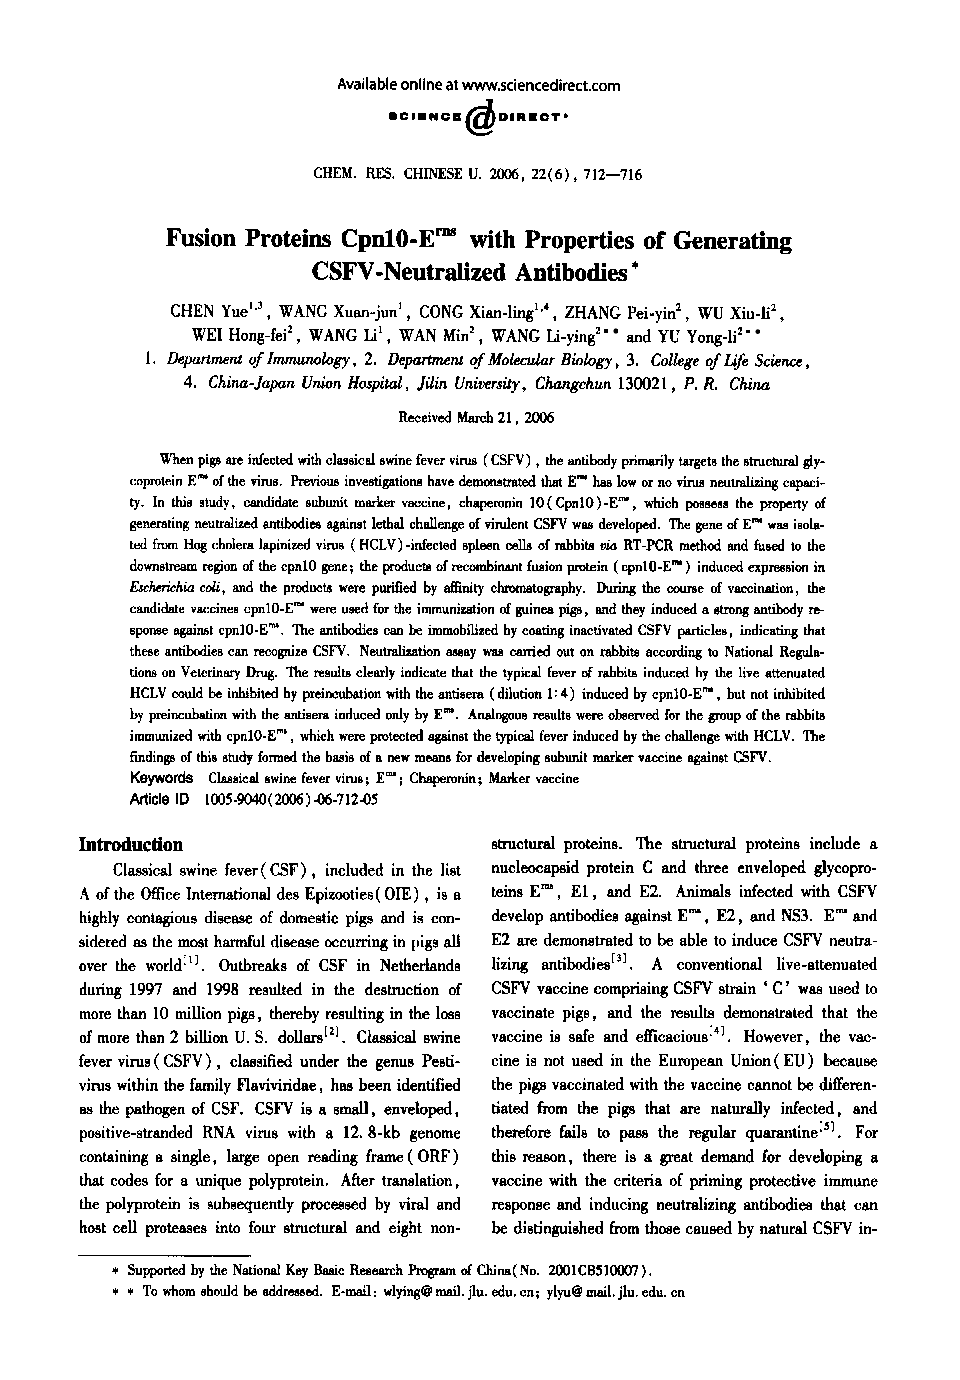 Fusion Proteins Cpn10-Erns with Properties of Generating CSFV-Neutralized Antibodies1
		